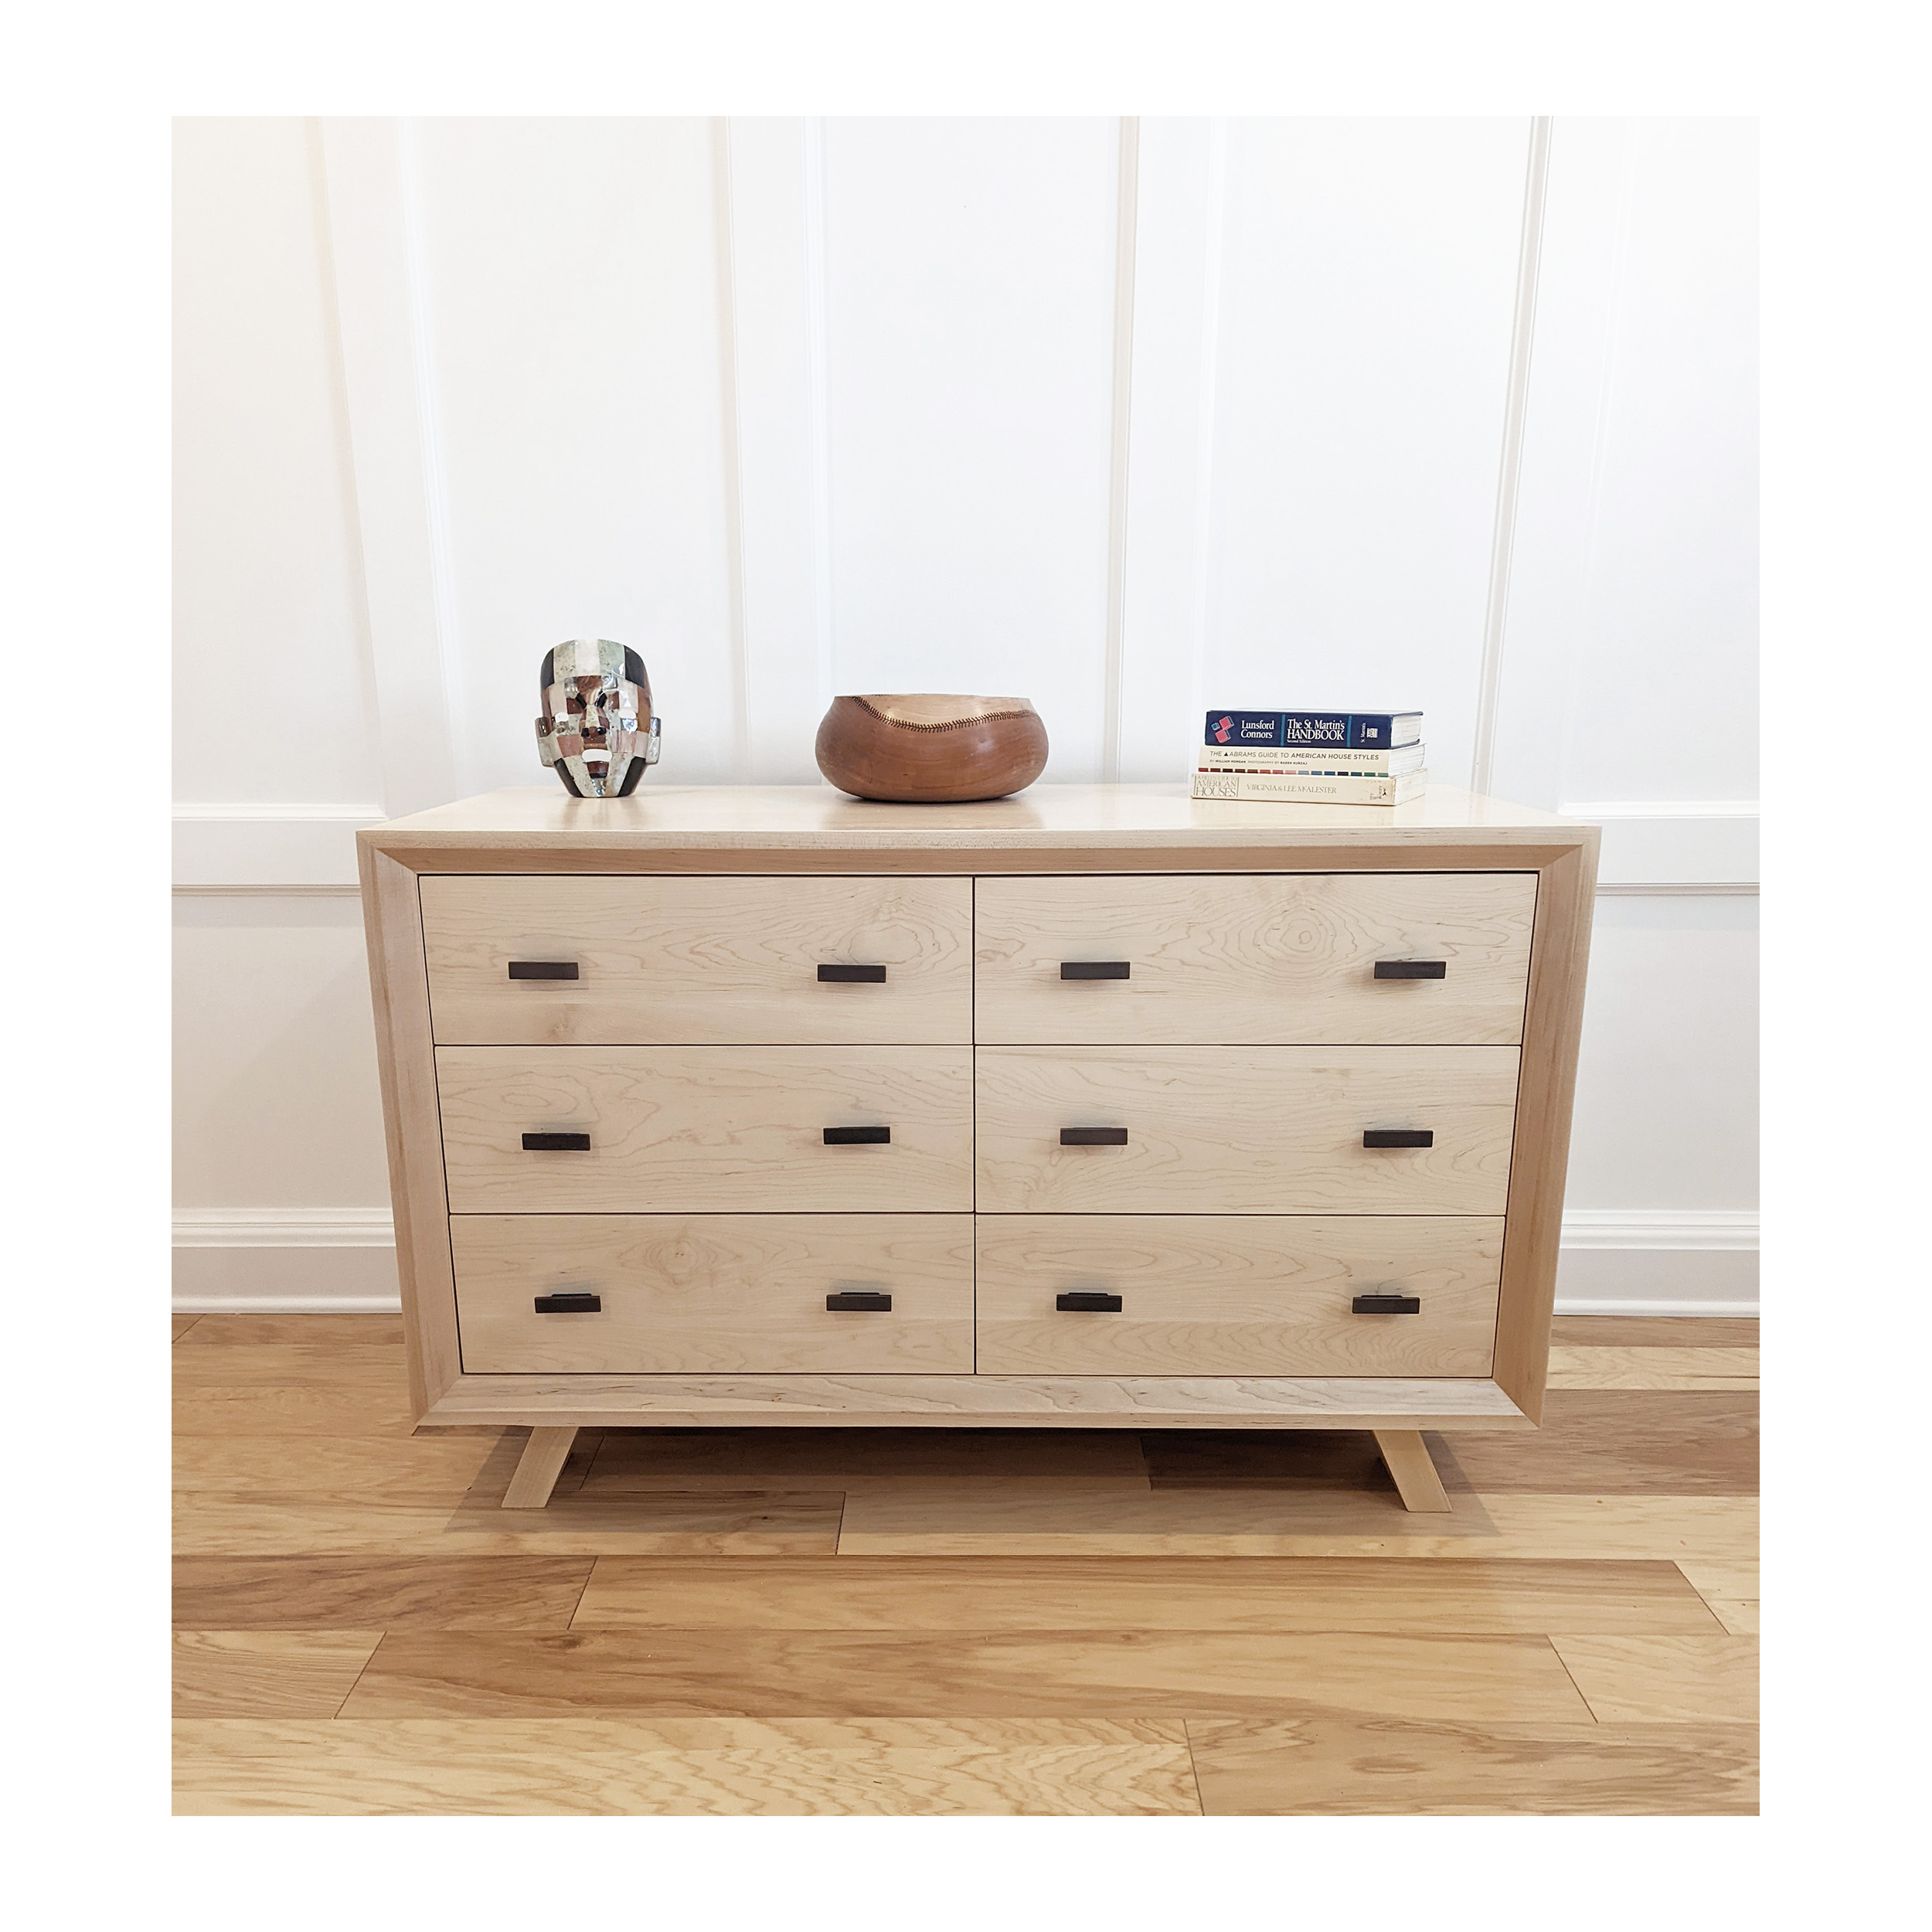 Series 555 Dresser With Six Drawers At 48″ In Width